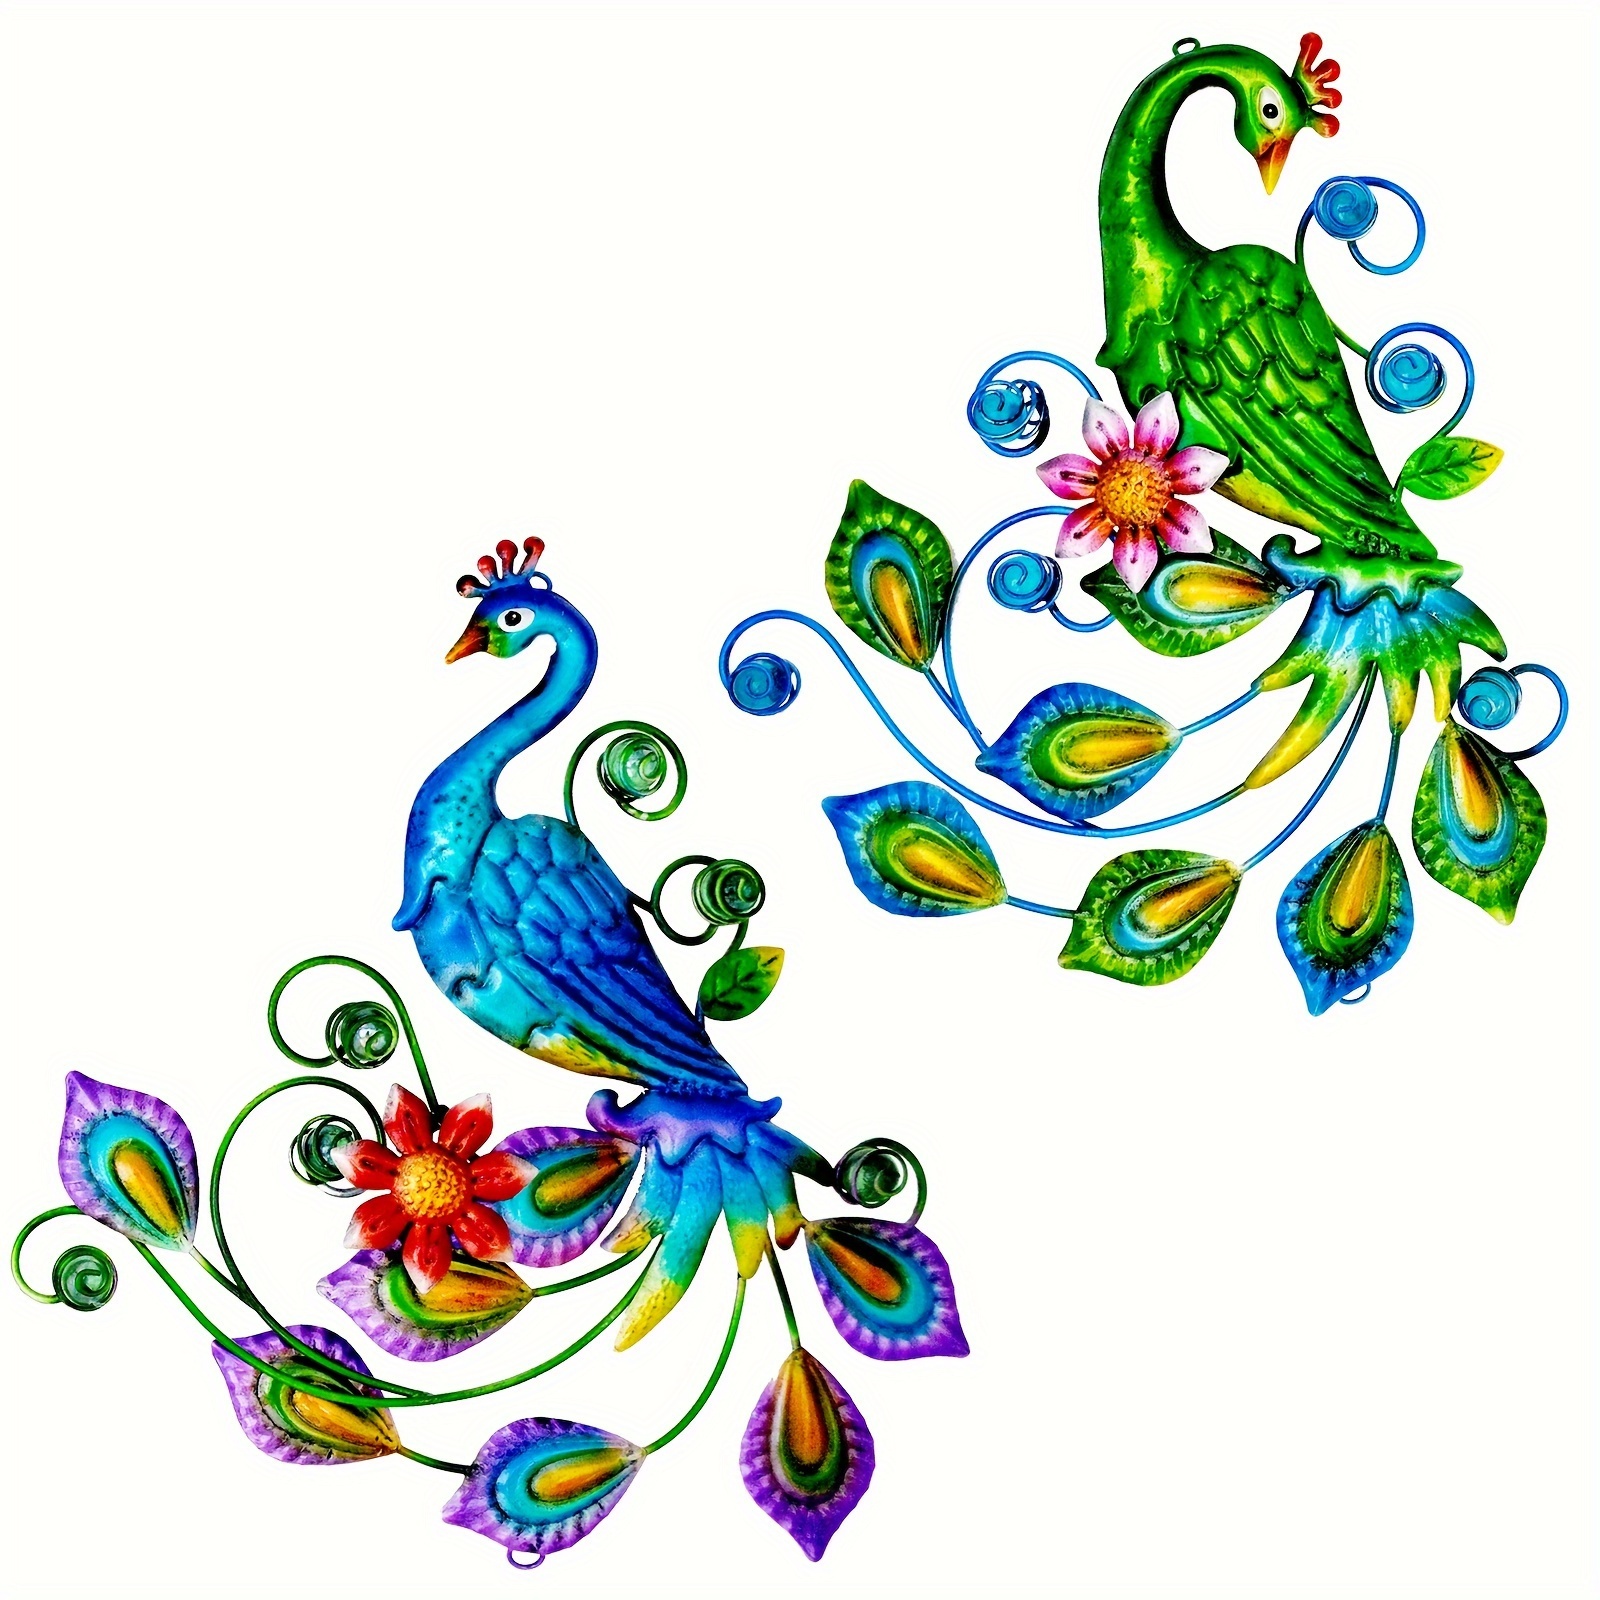 

2pcs/set Metal Peacock Wall Hangings With Floral Design, Colorful , Indoor/outdoor Home Decor